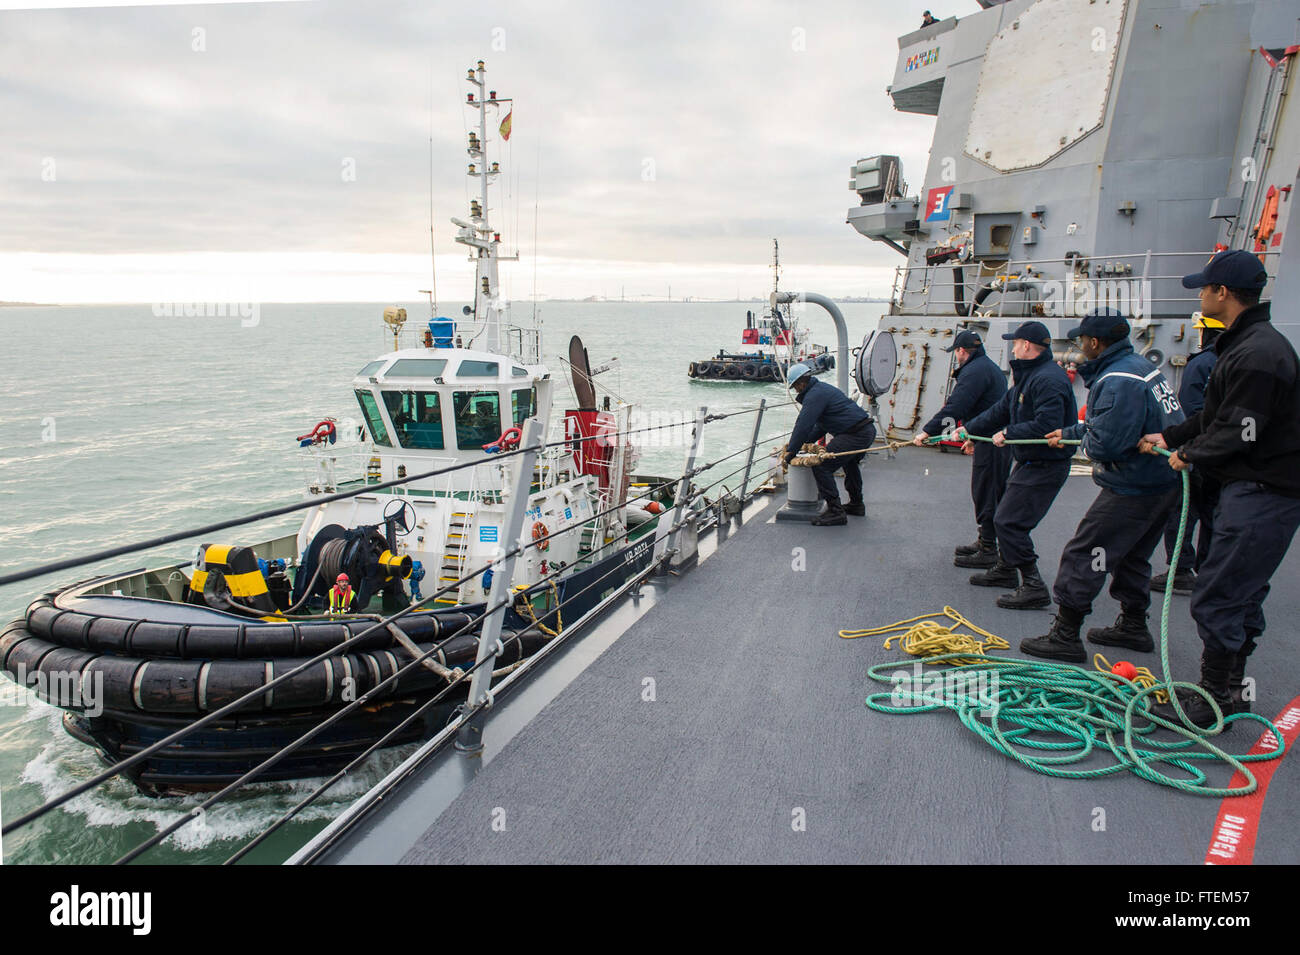 Spain (Feb. 23, 2015) Sailors aboard USS Laboon (DDG 58) heave a line connected to a tug boat as the ship makes preparations to moor at Naval Station Rota, Spain, Feb. 23, 2015. Laboon, an Arleigh Burke-class guided-missile destroyer, homeported in Norfolk, is conducting naval operations in the U.S. 6th Fleet area of operations in support of U.S. national security interests in Europe. Stock Photo